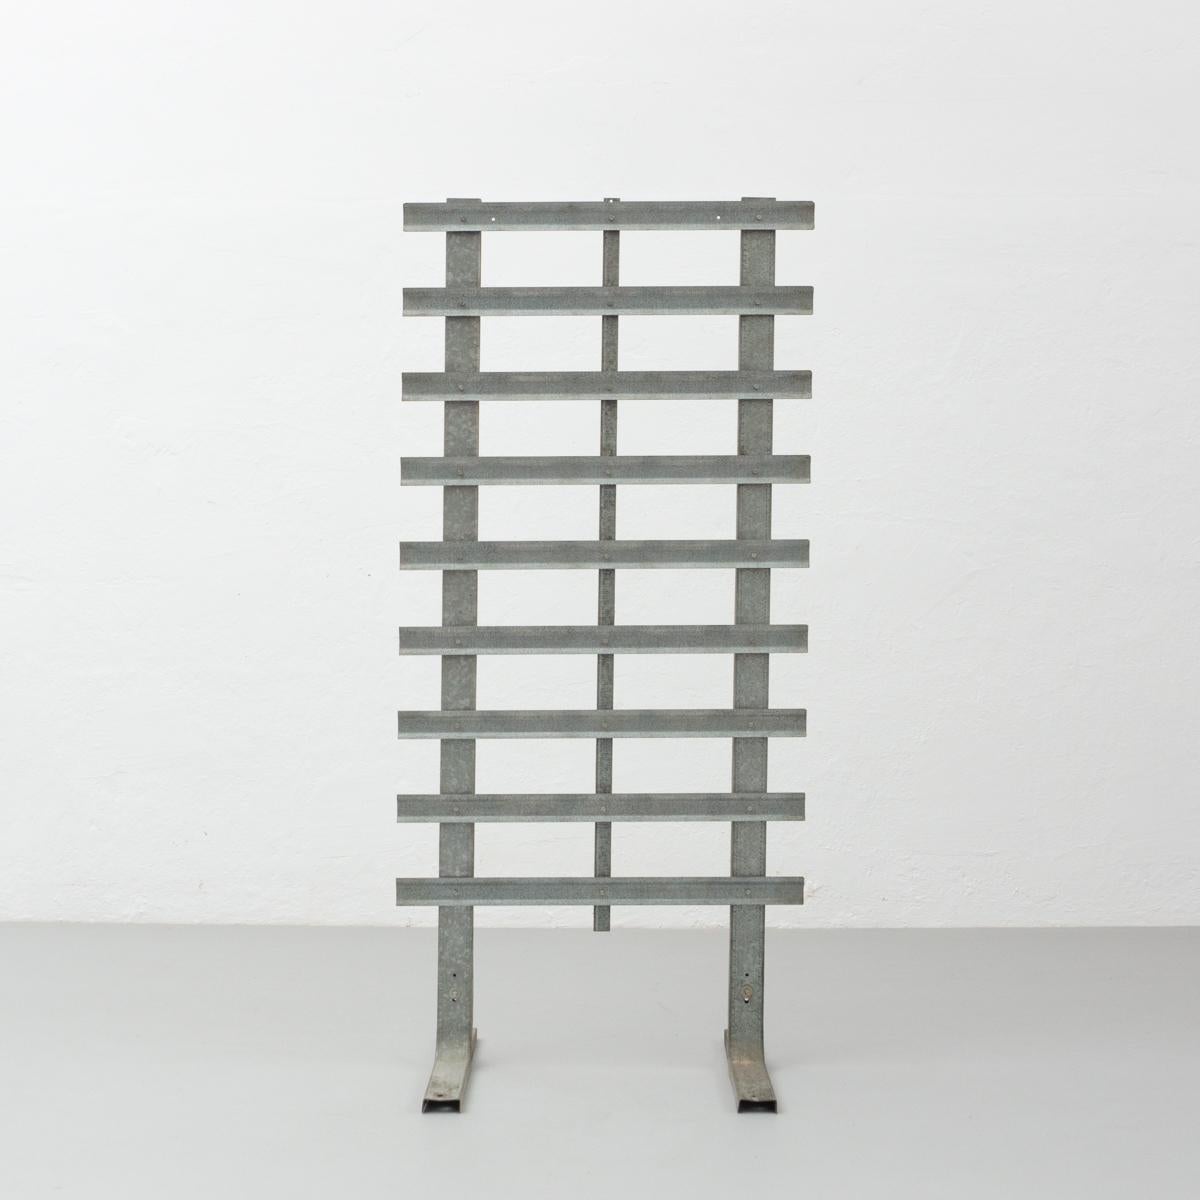 Ramon Horts Contemporary Abstract Minimalist Sculpture in Metal 2